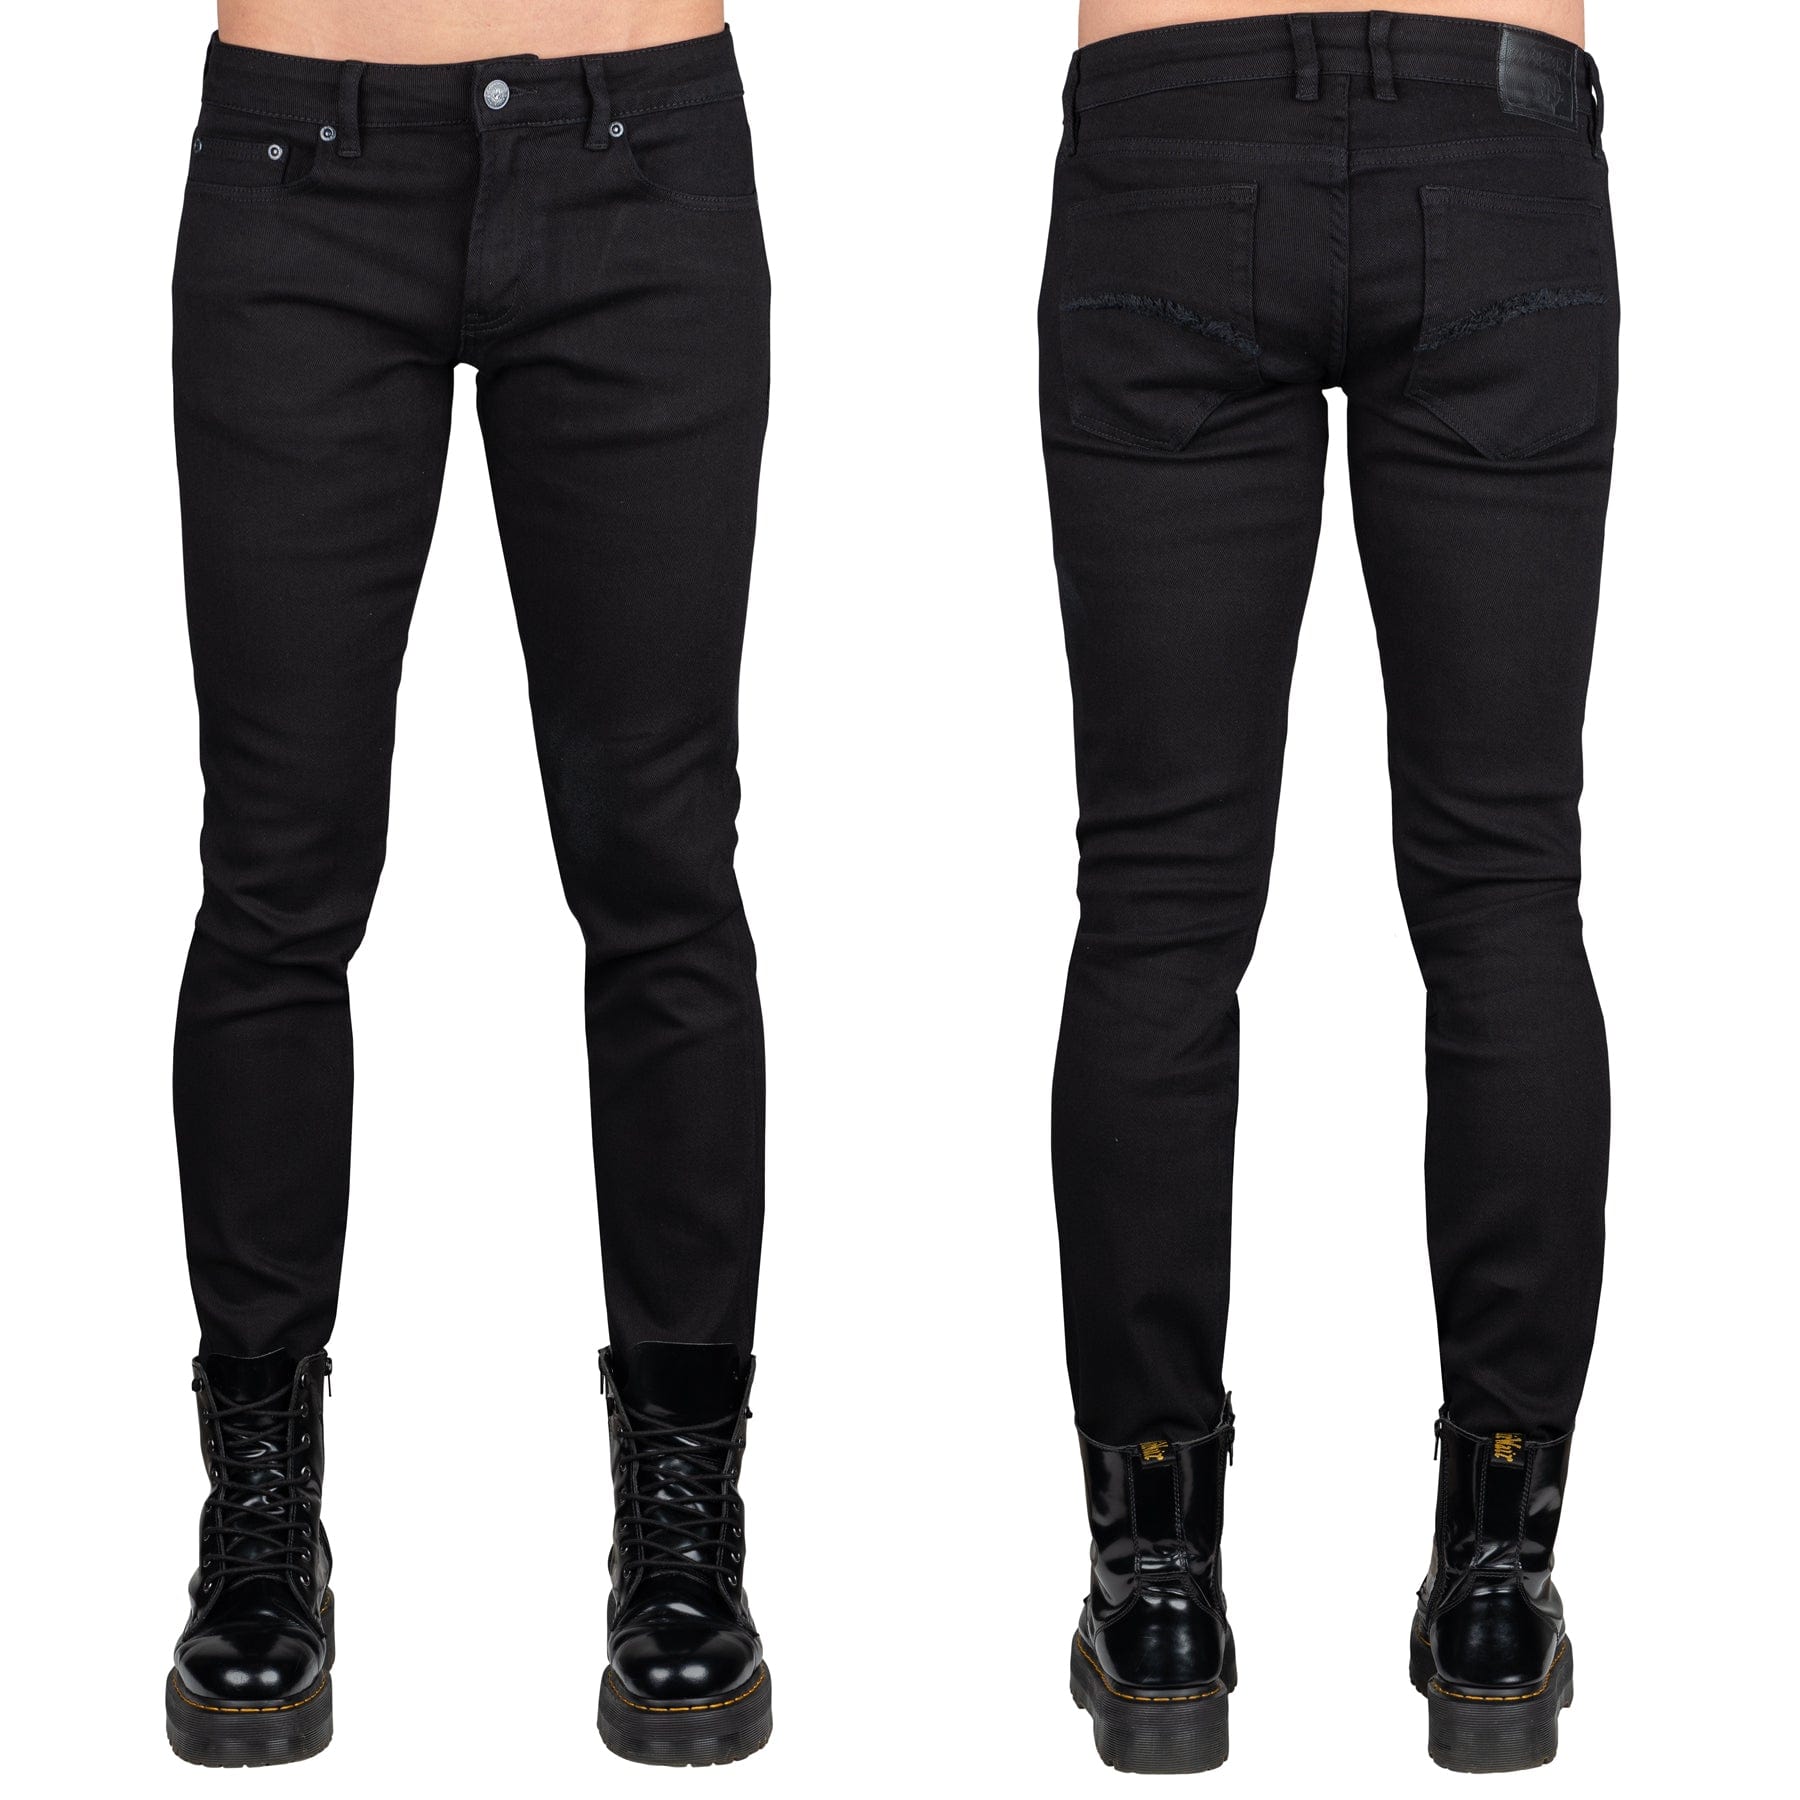 Essentials Collection Pants Rampager Jeans - Black